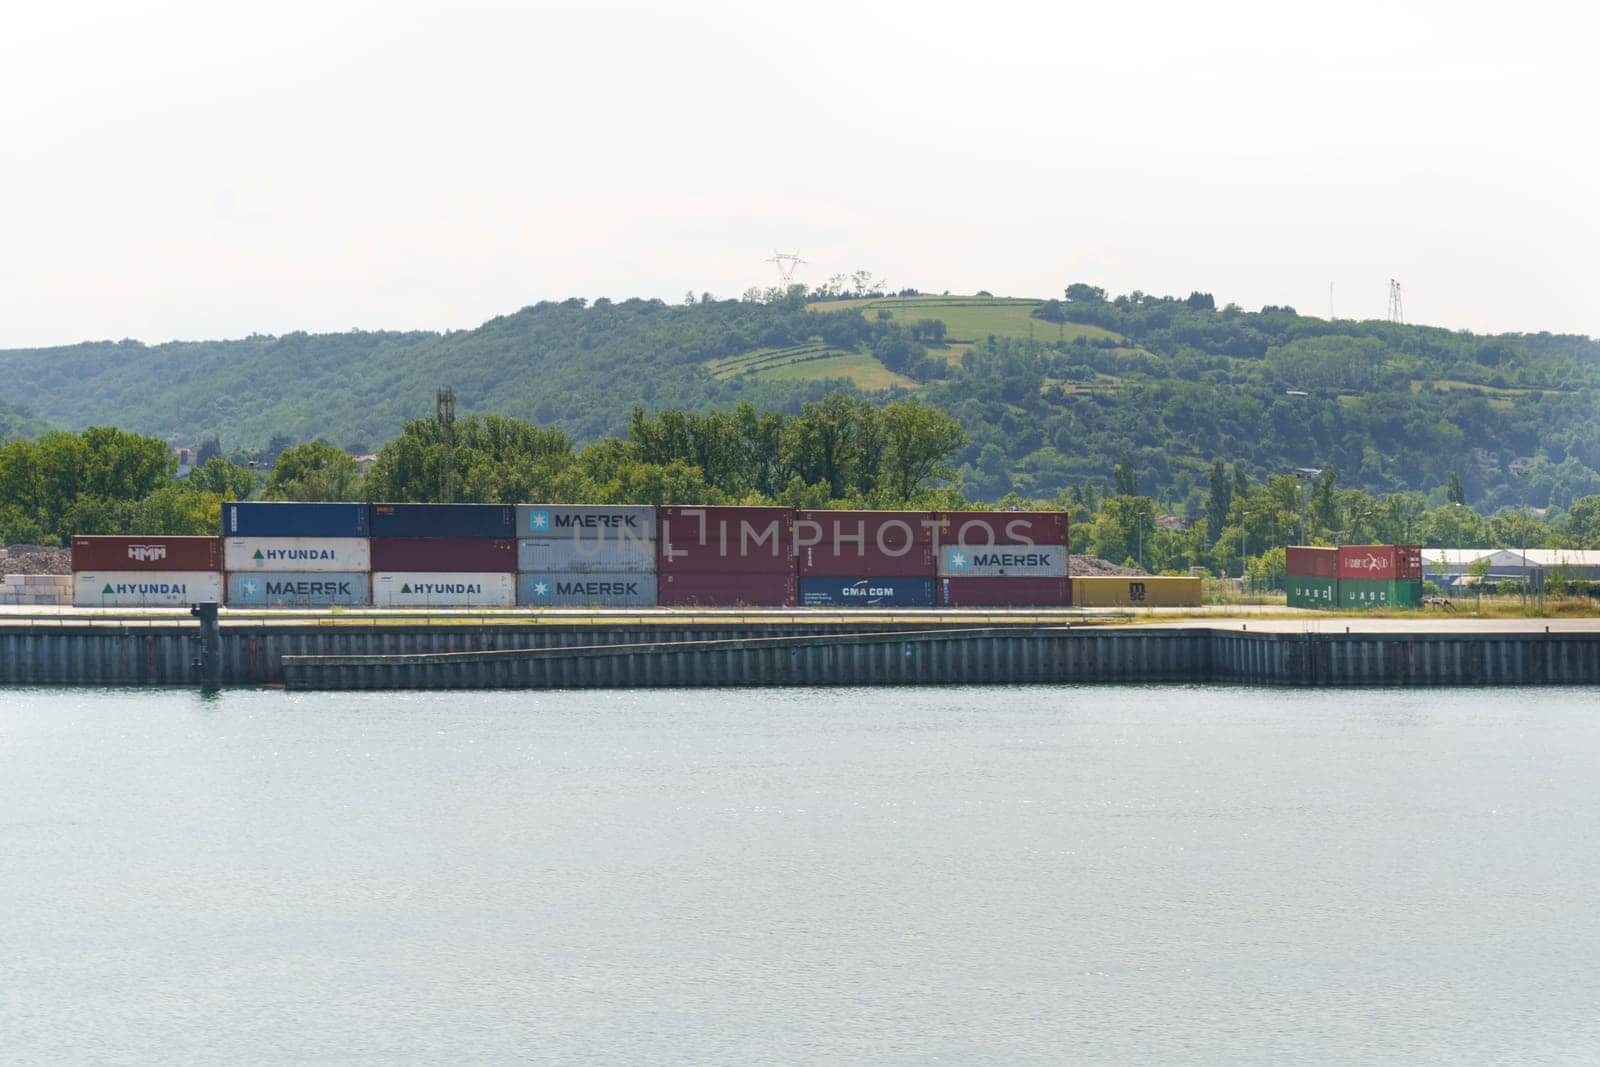 Lyon, France - May 30, 2023: Stacked shipping containers in varying colors beside a calm river, with a green hill in the background under a clear sky.